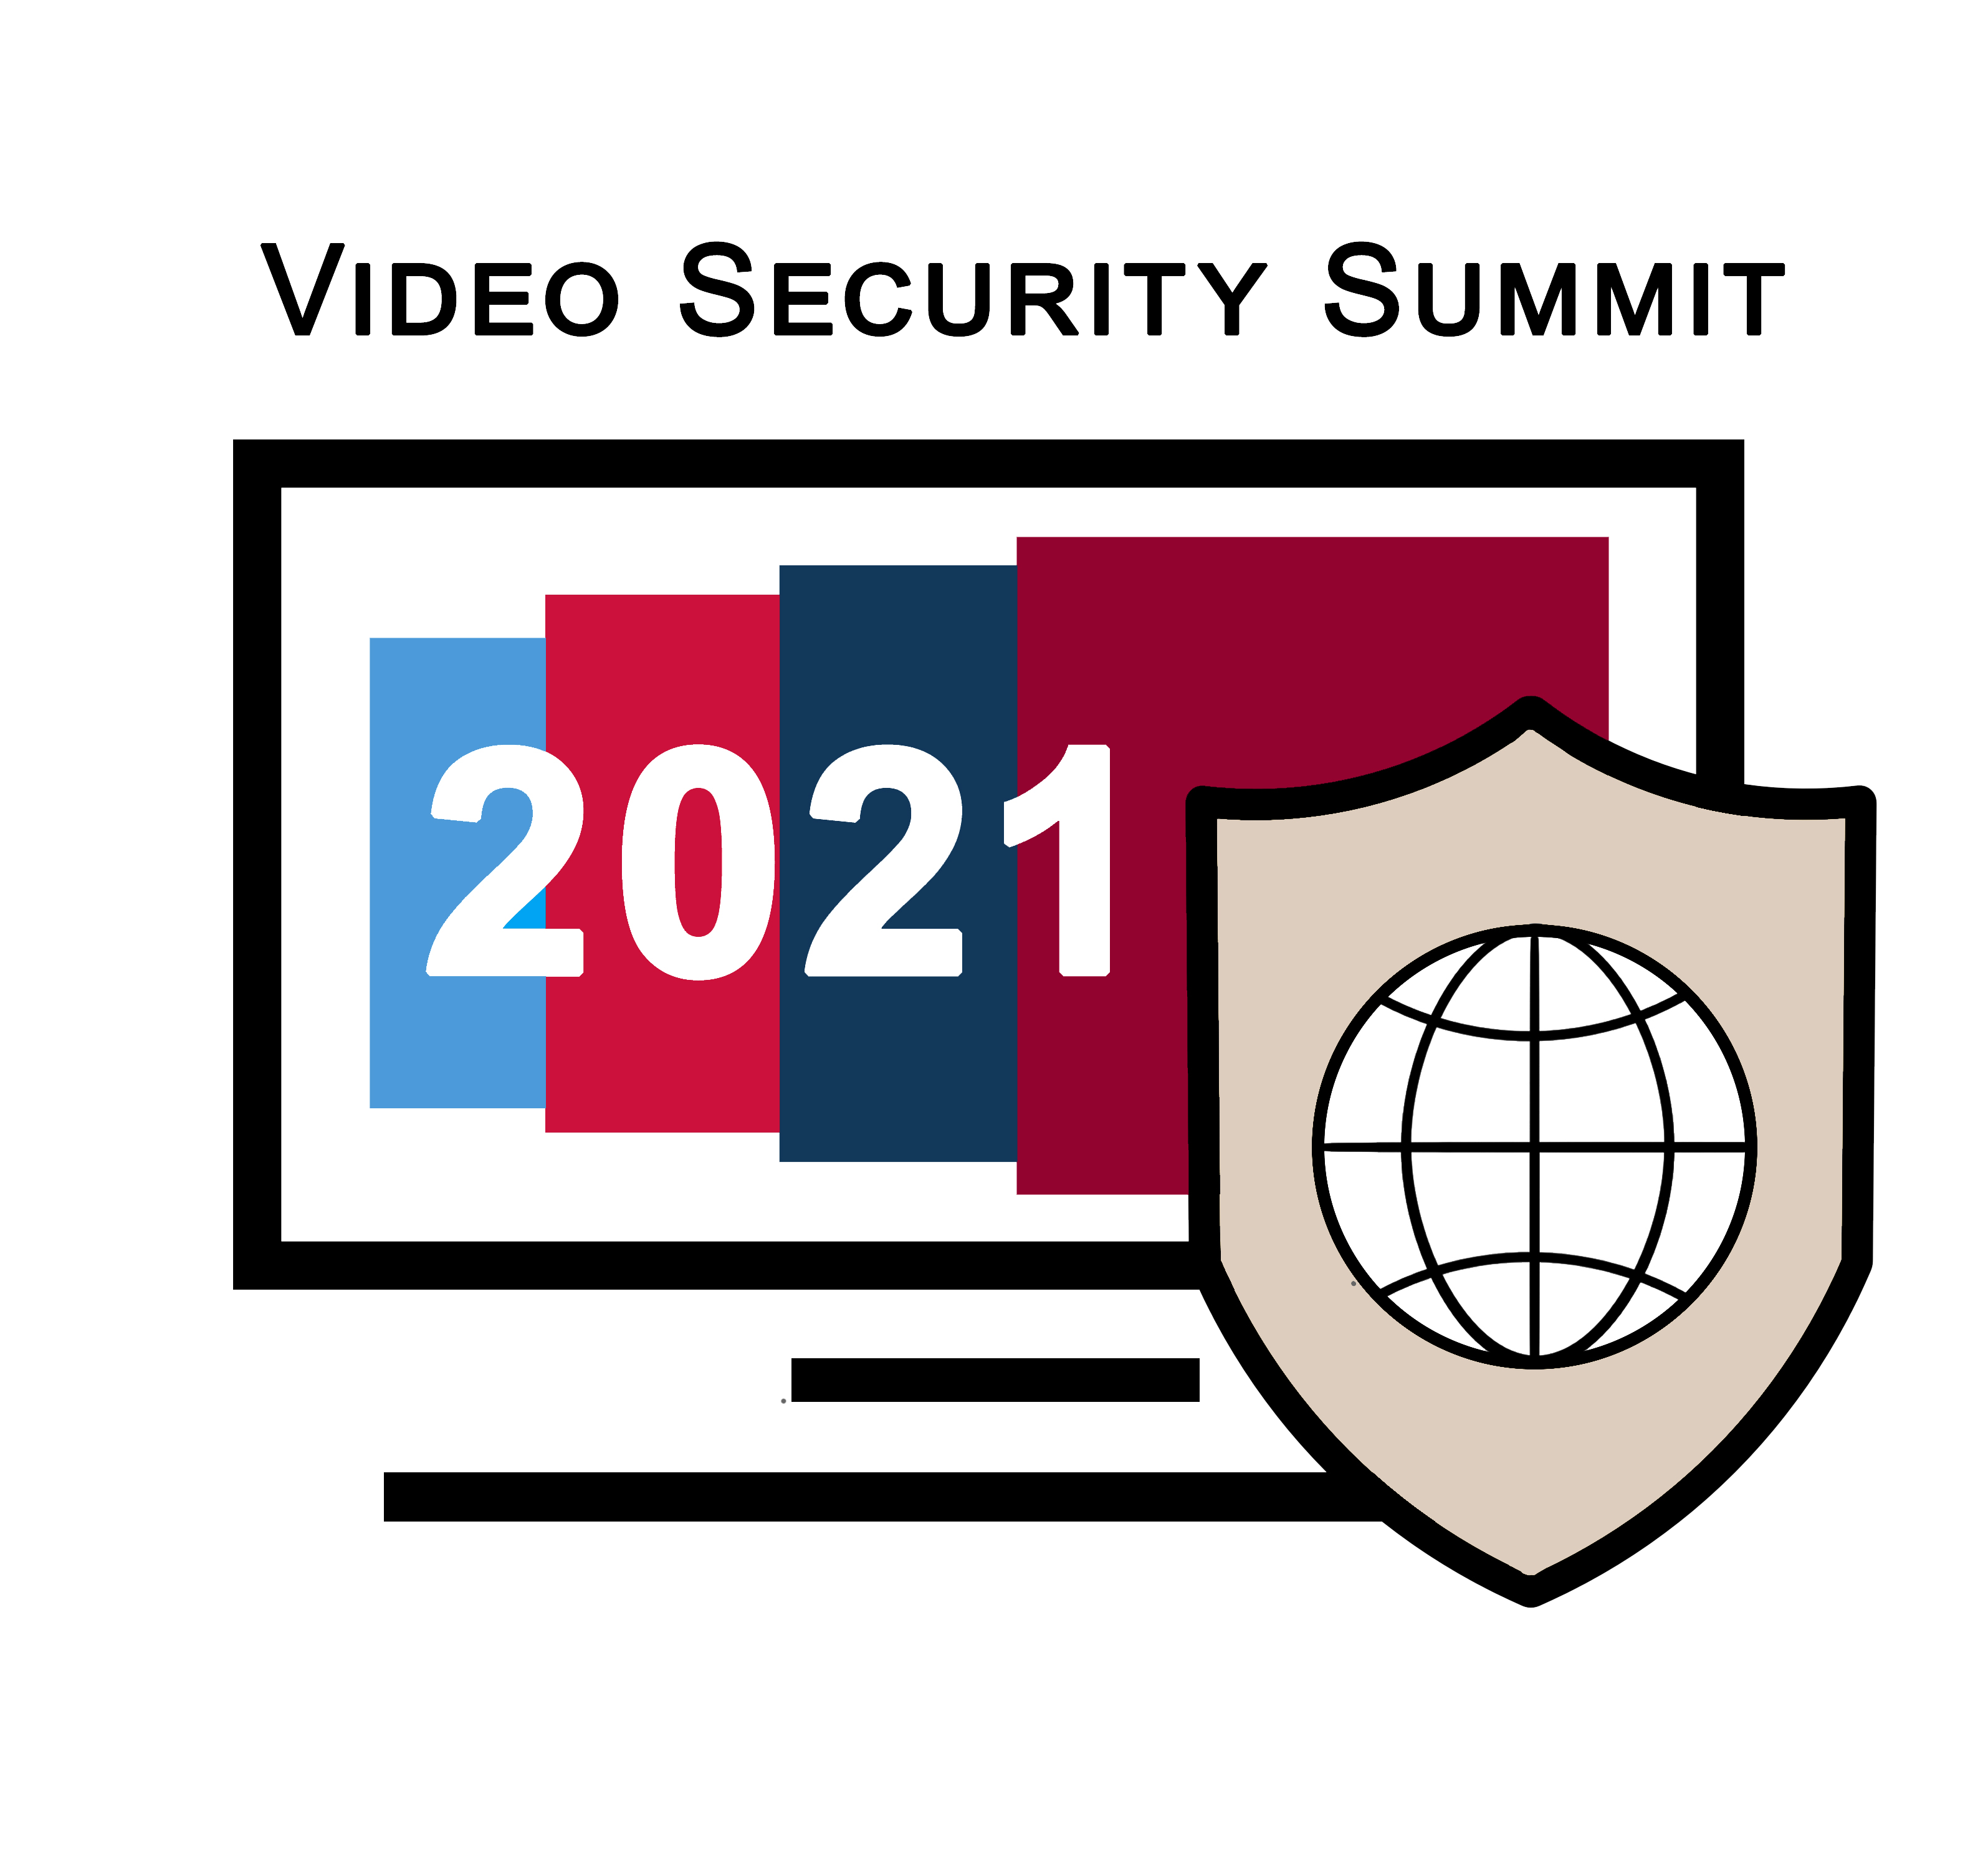 Video Security Summit 2021